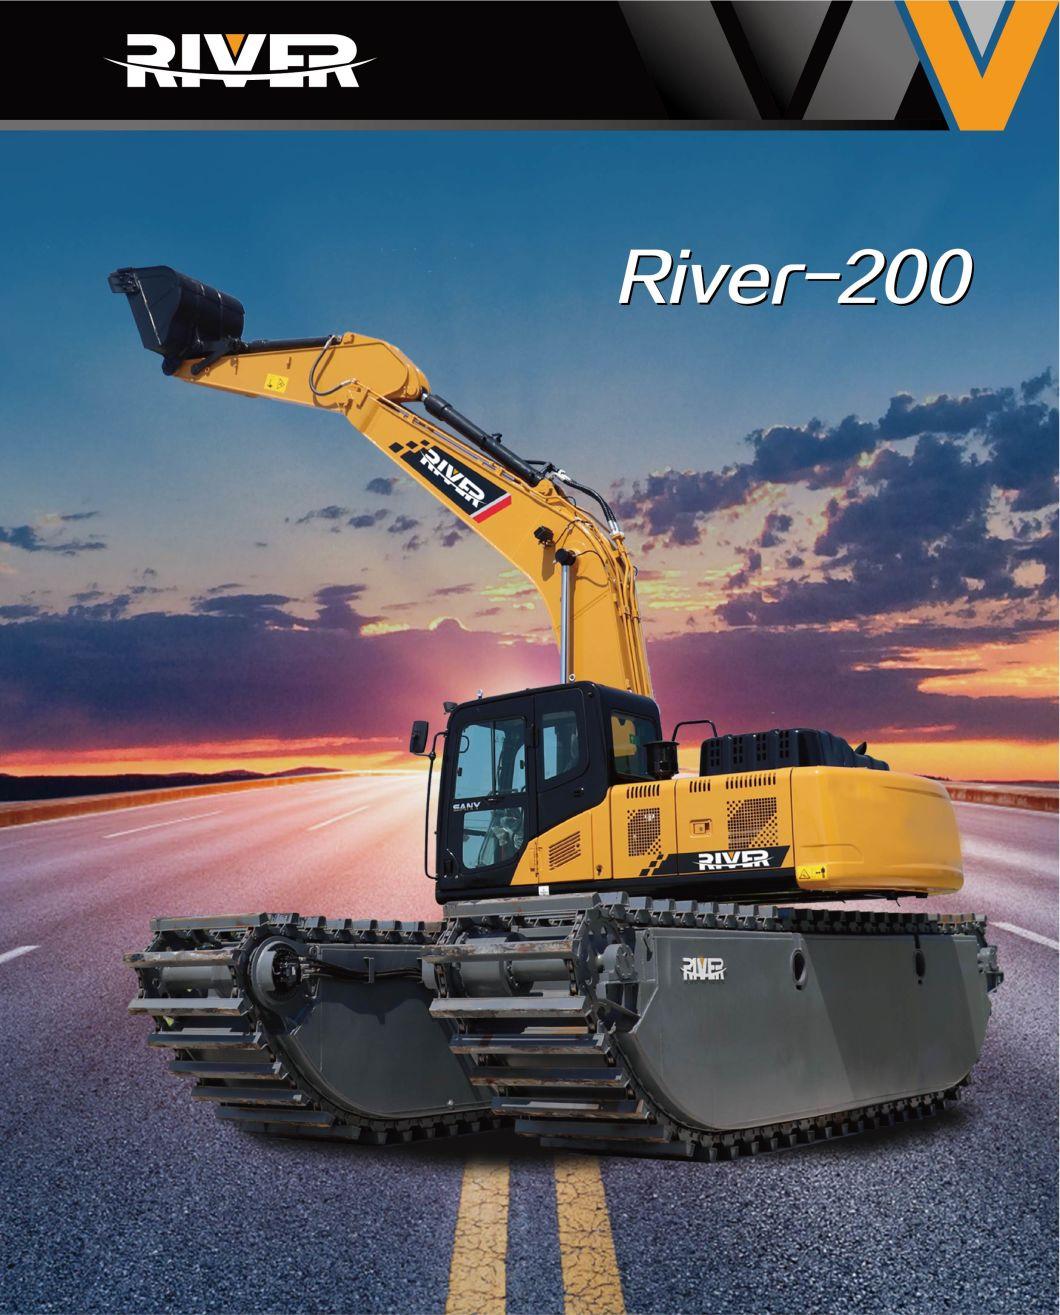 Chinese Factory Used Cat 320c Crawler Amphibious Excavator for Sale Dredging Excavator with Pontoon Undercarriage Long Arm